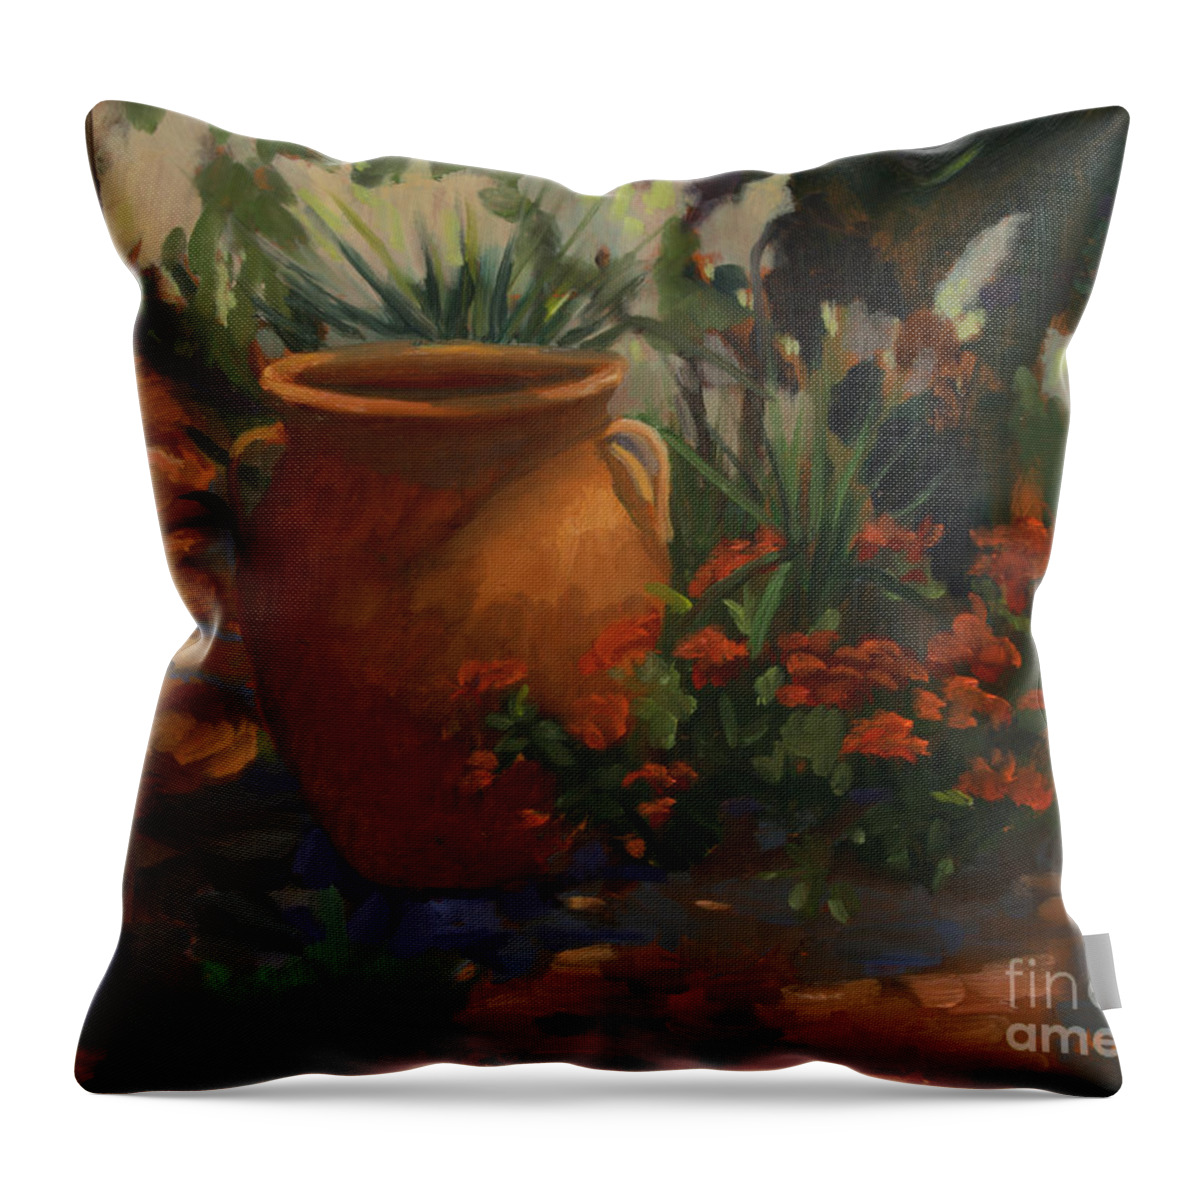 Contemporary Floral Throw Pillow featuring the painting Terra Cotta Garden by Maria Hunt